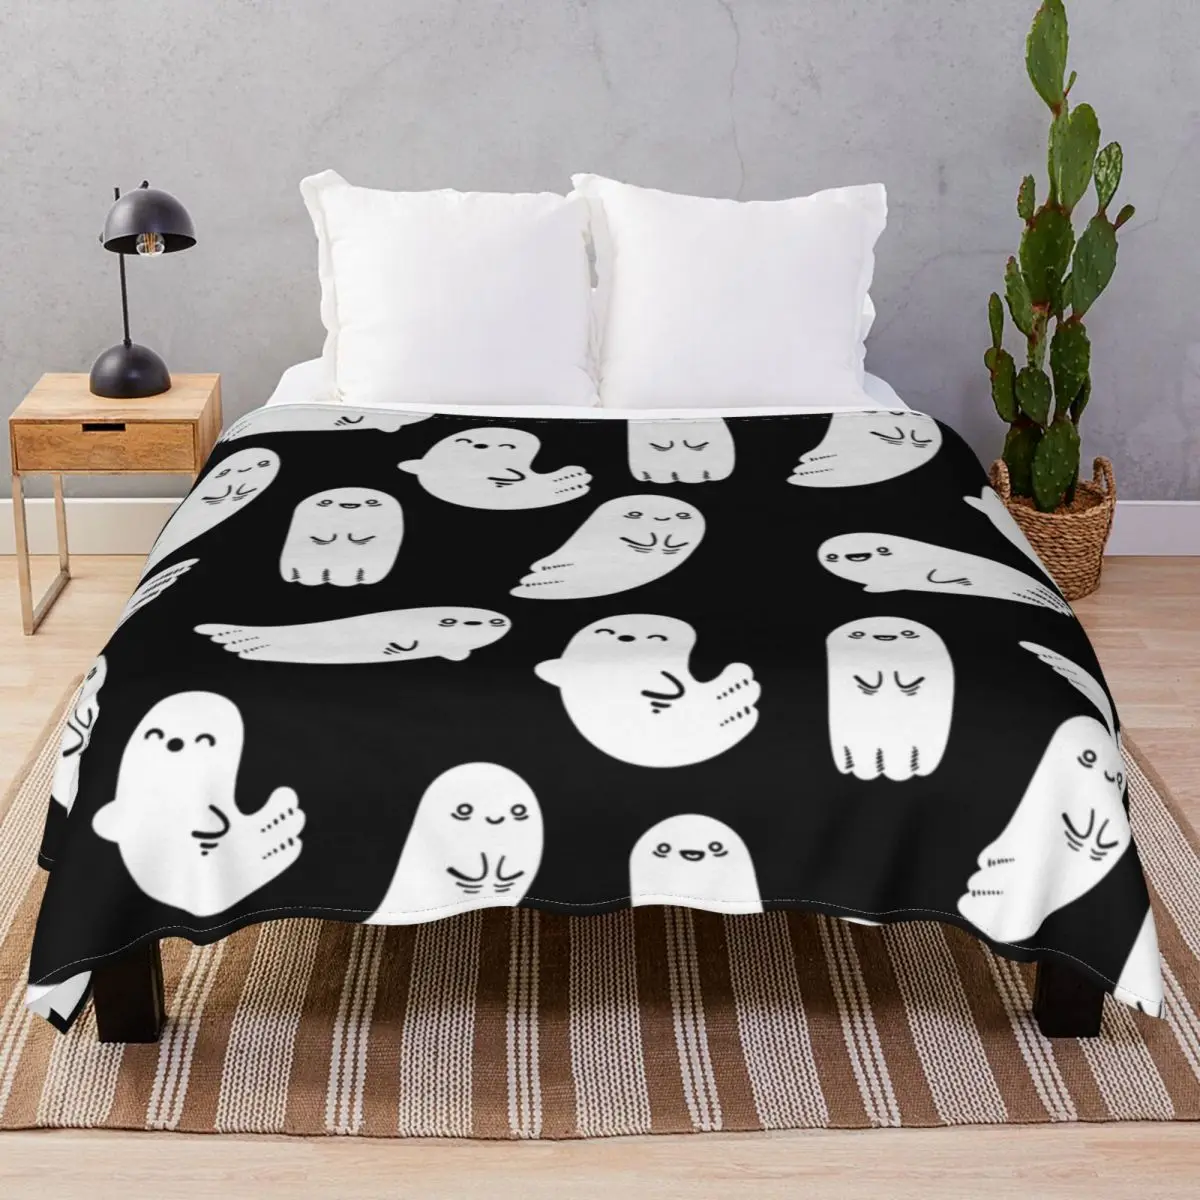 Cute And Spooky Ghosts Blanket Flannel Winter Fluffy Throw Blankets for Bed Sofa Travel Office